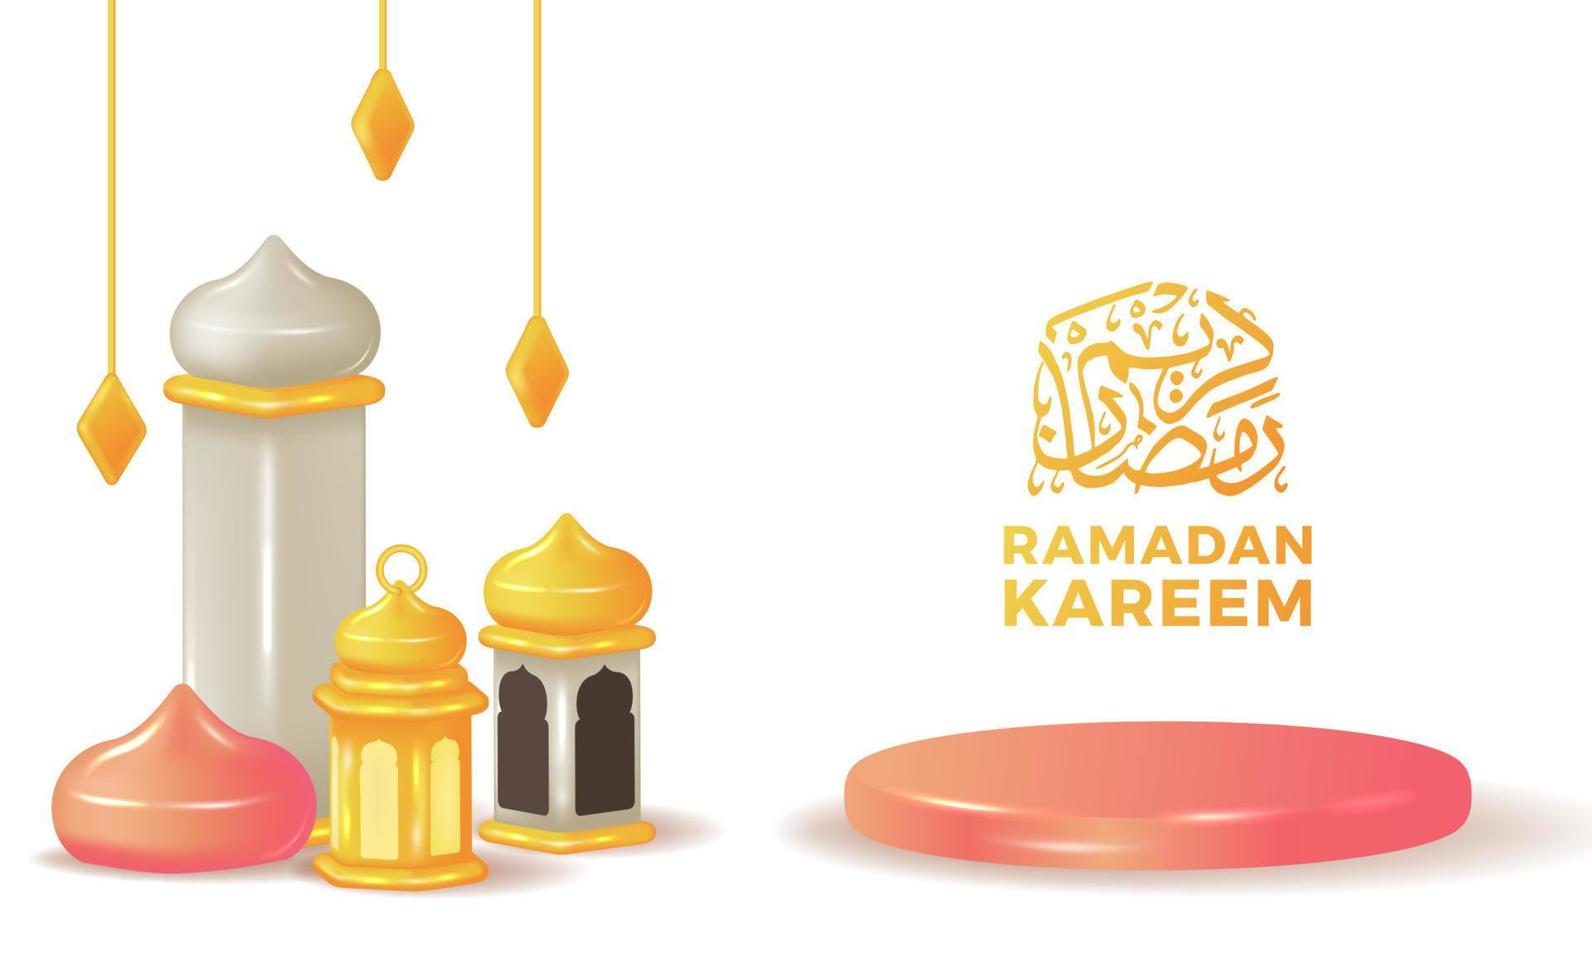 Ramadan kareem with podium stage display with tower mosque 3d illustration with arabic calligraphy template vector